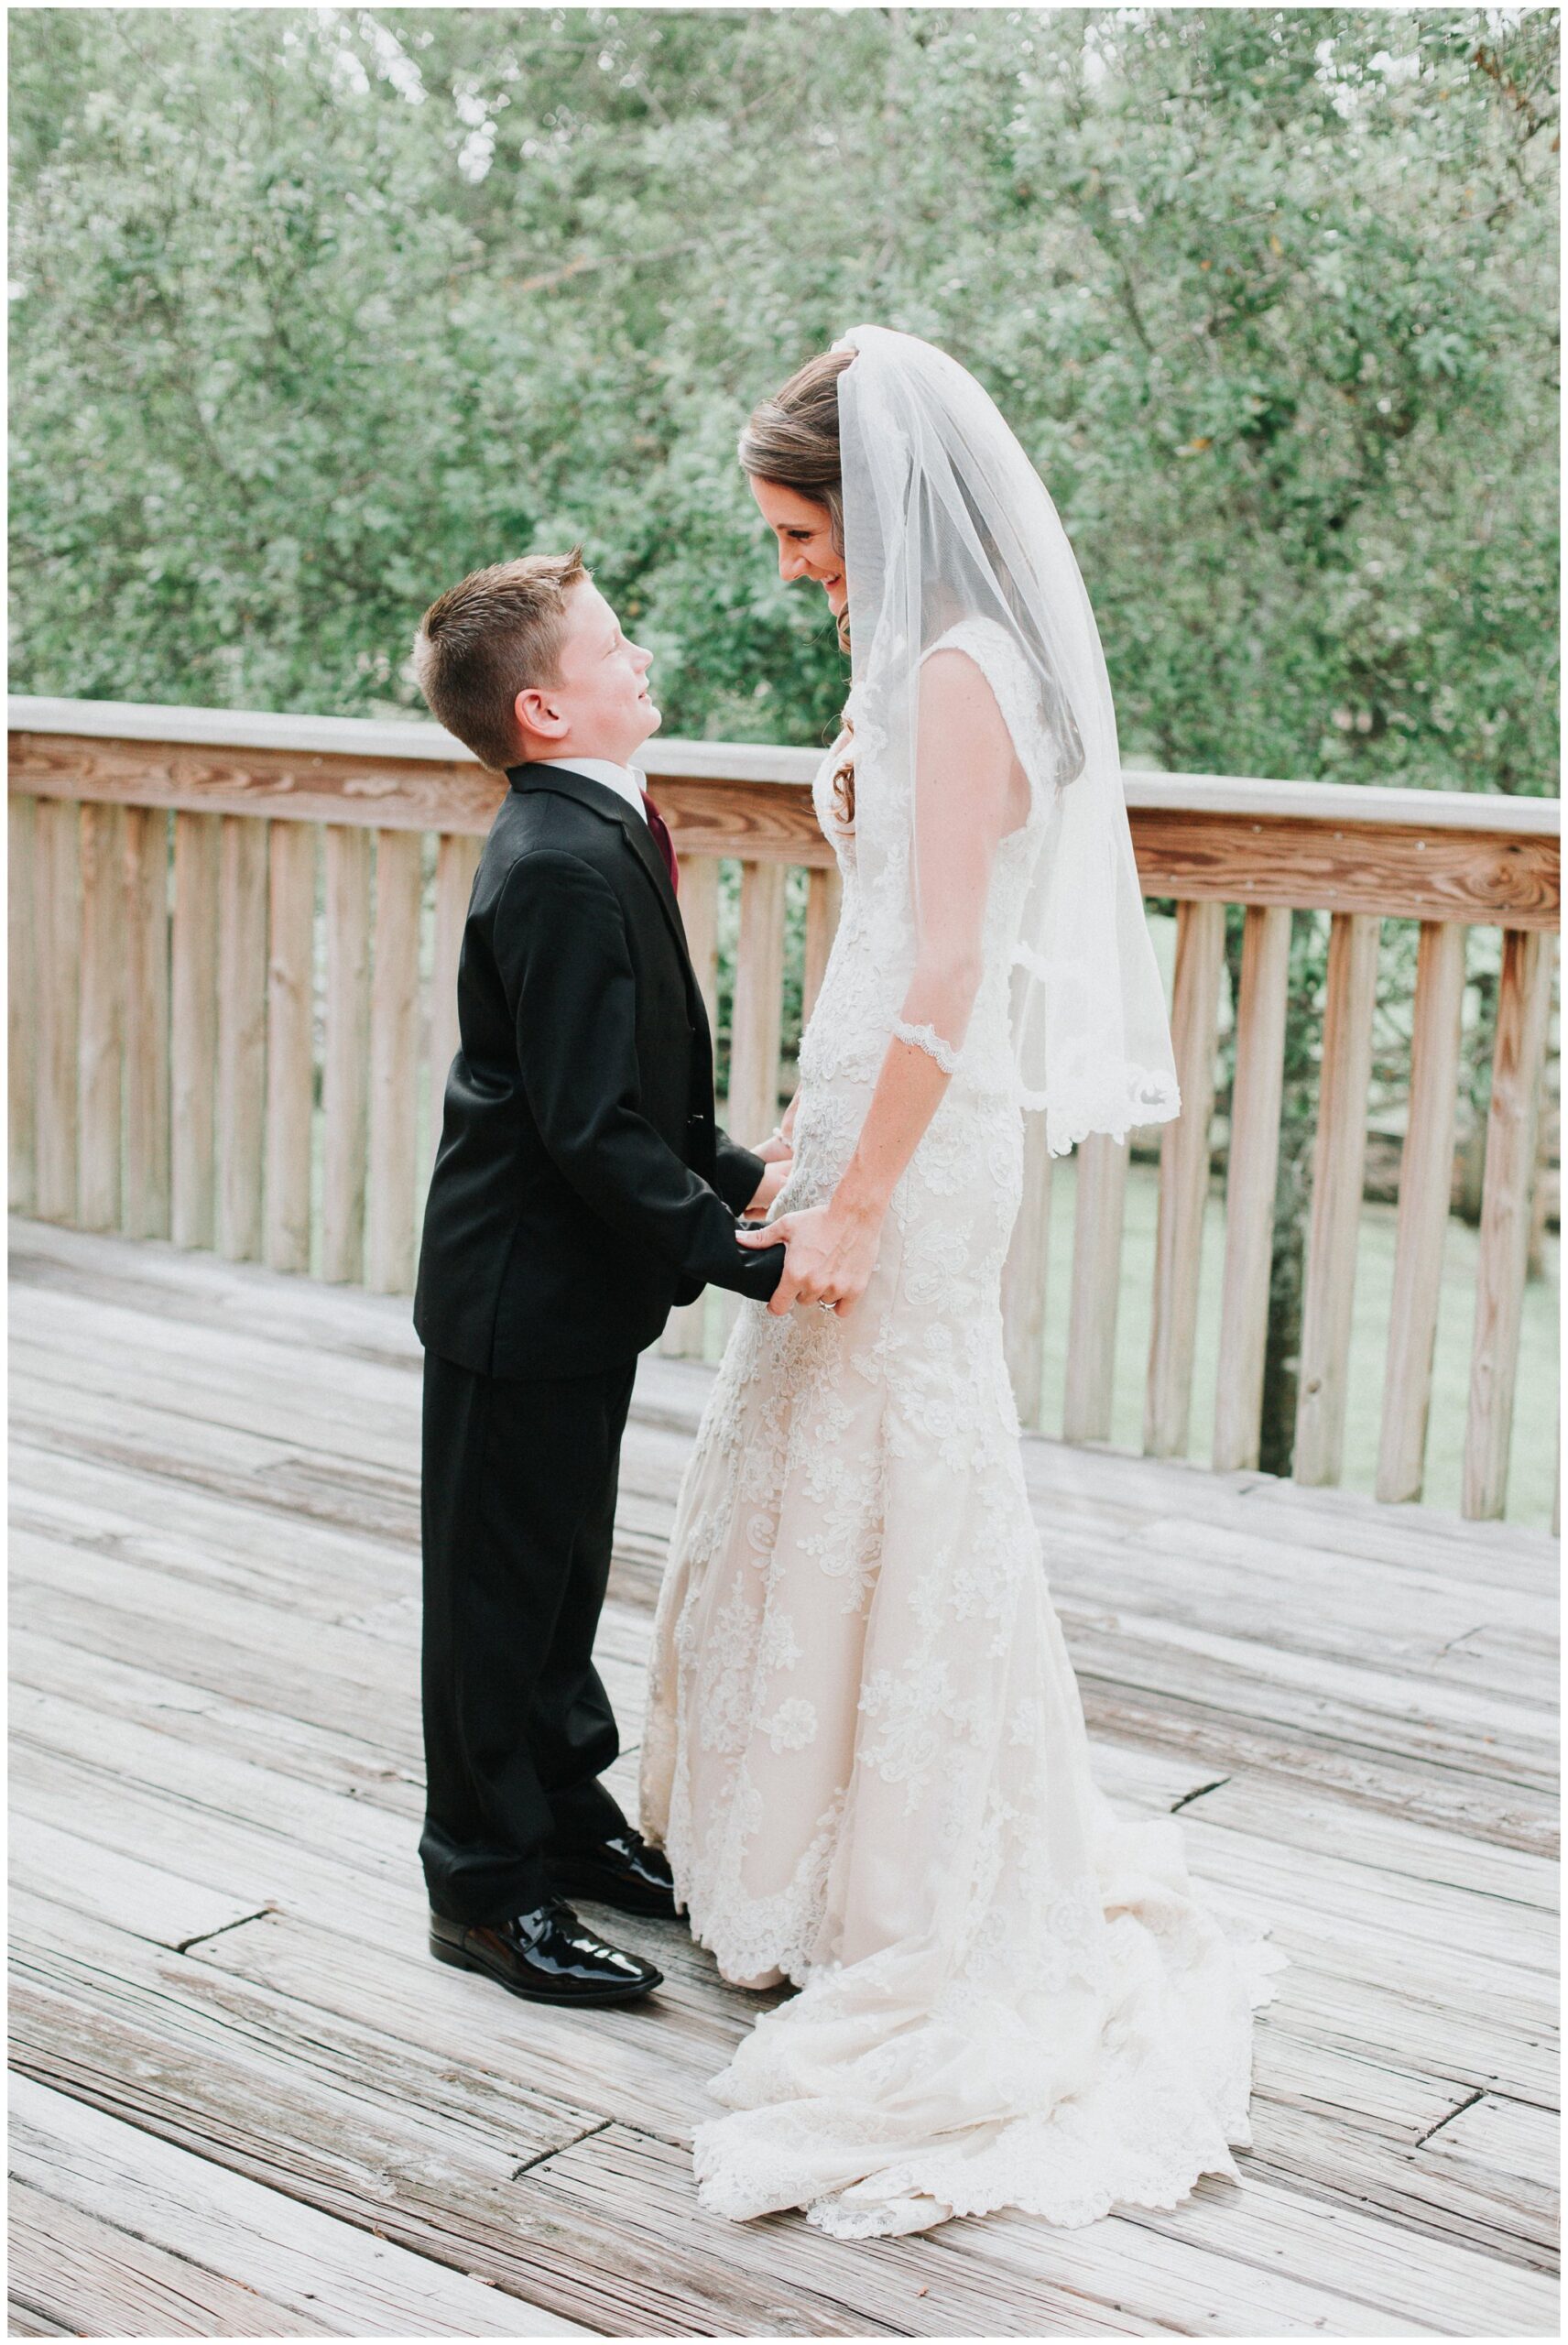 The bride with her sweet son. As a mom, this photo melts my heart!